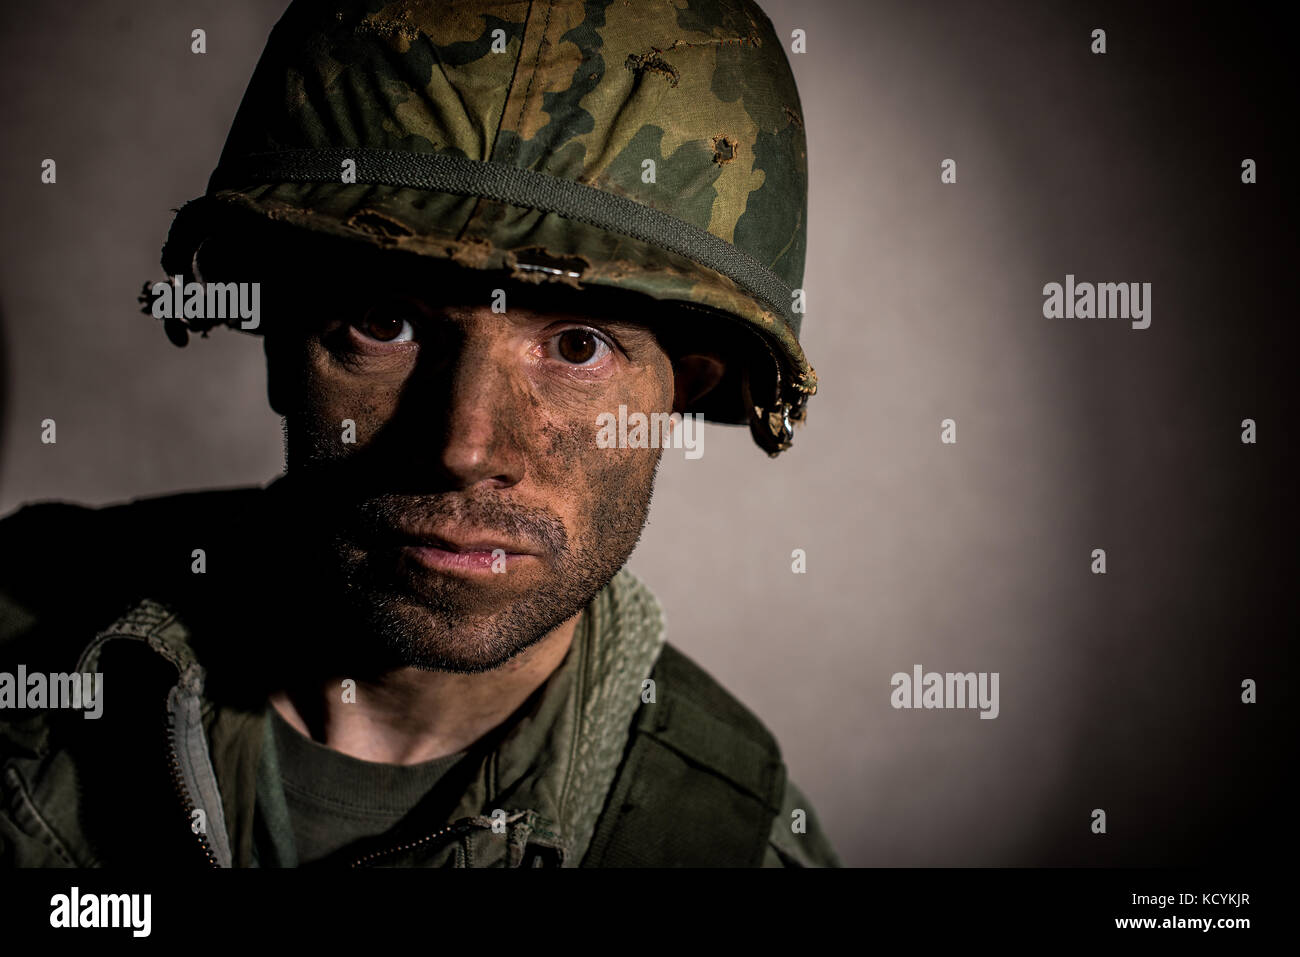 Shell shocked soldier (US Marine / Vietnam War) with face covered in dirt,  against a dark background Stock Photo - Alamy